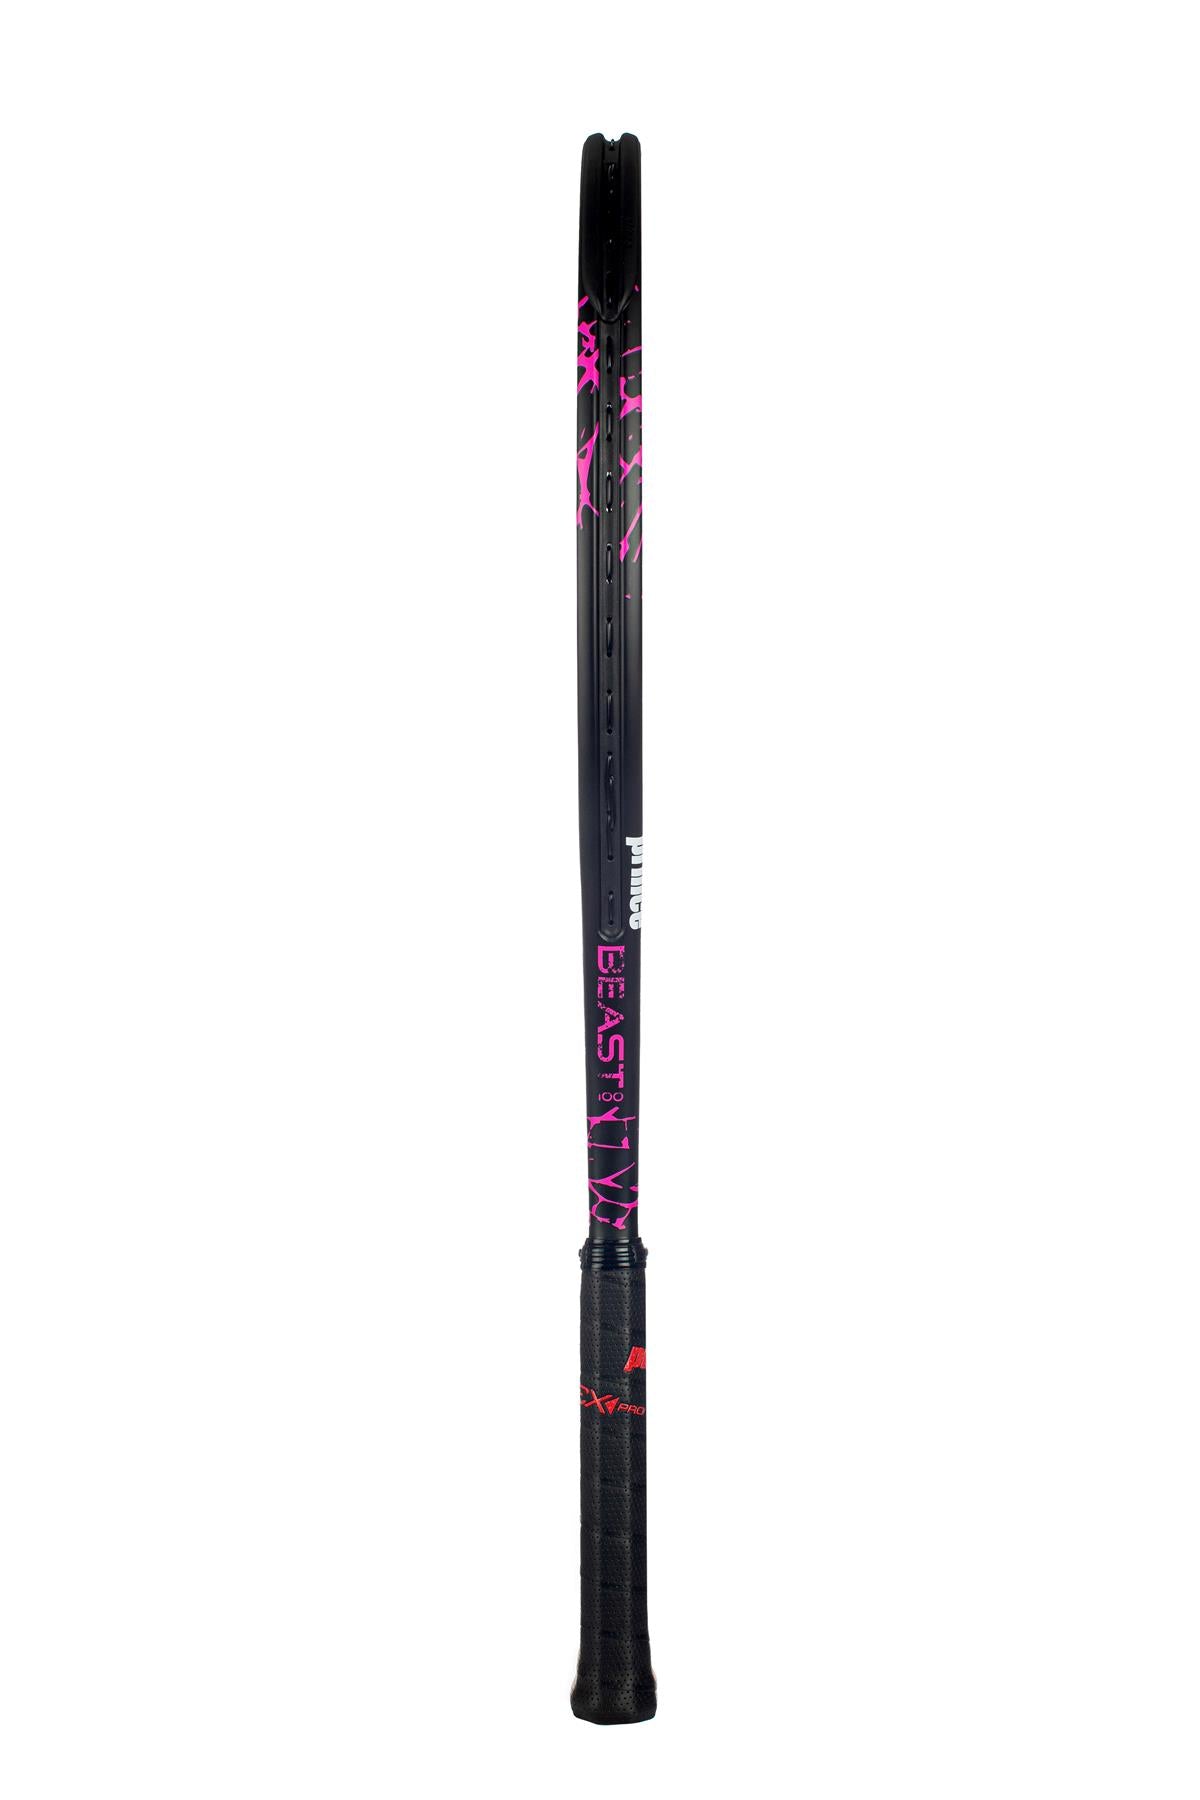 Prince Beast Pink 100 280g Tennis Racket (Frame Only) - Side